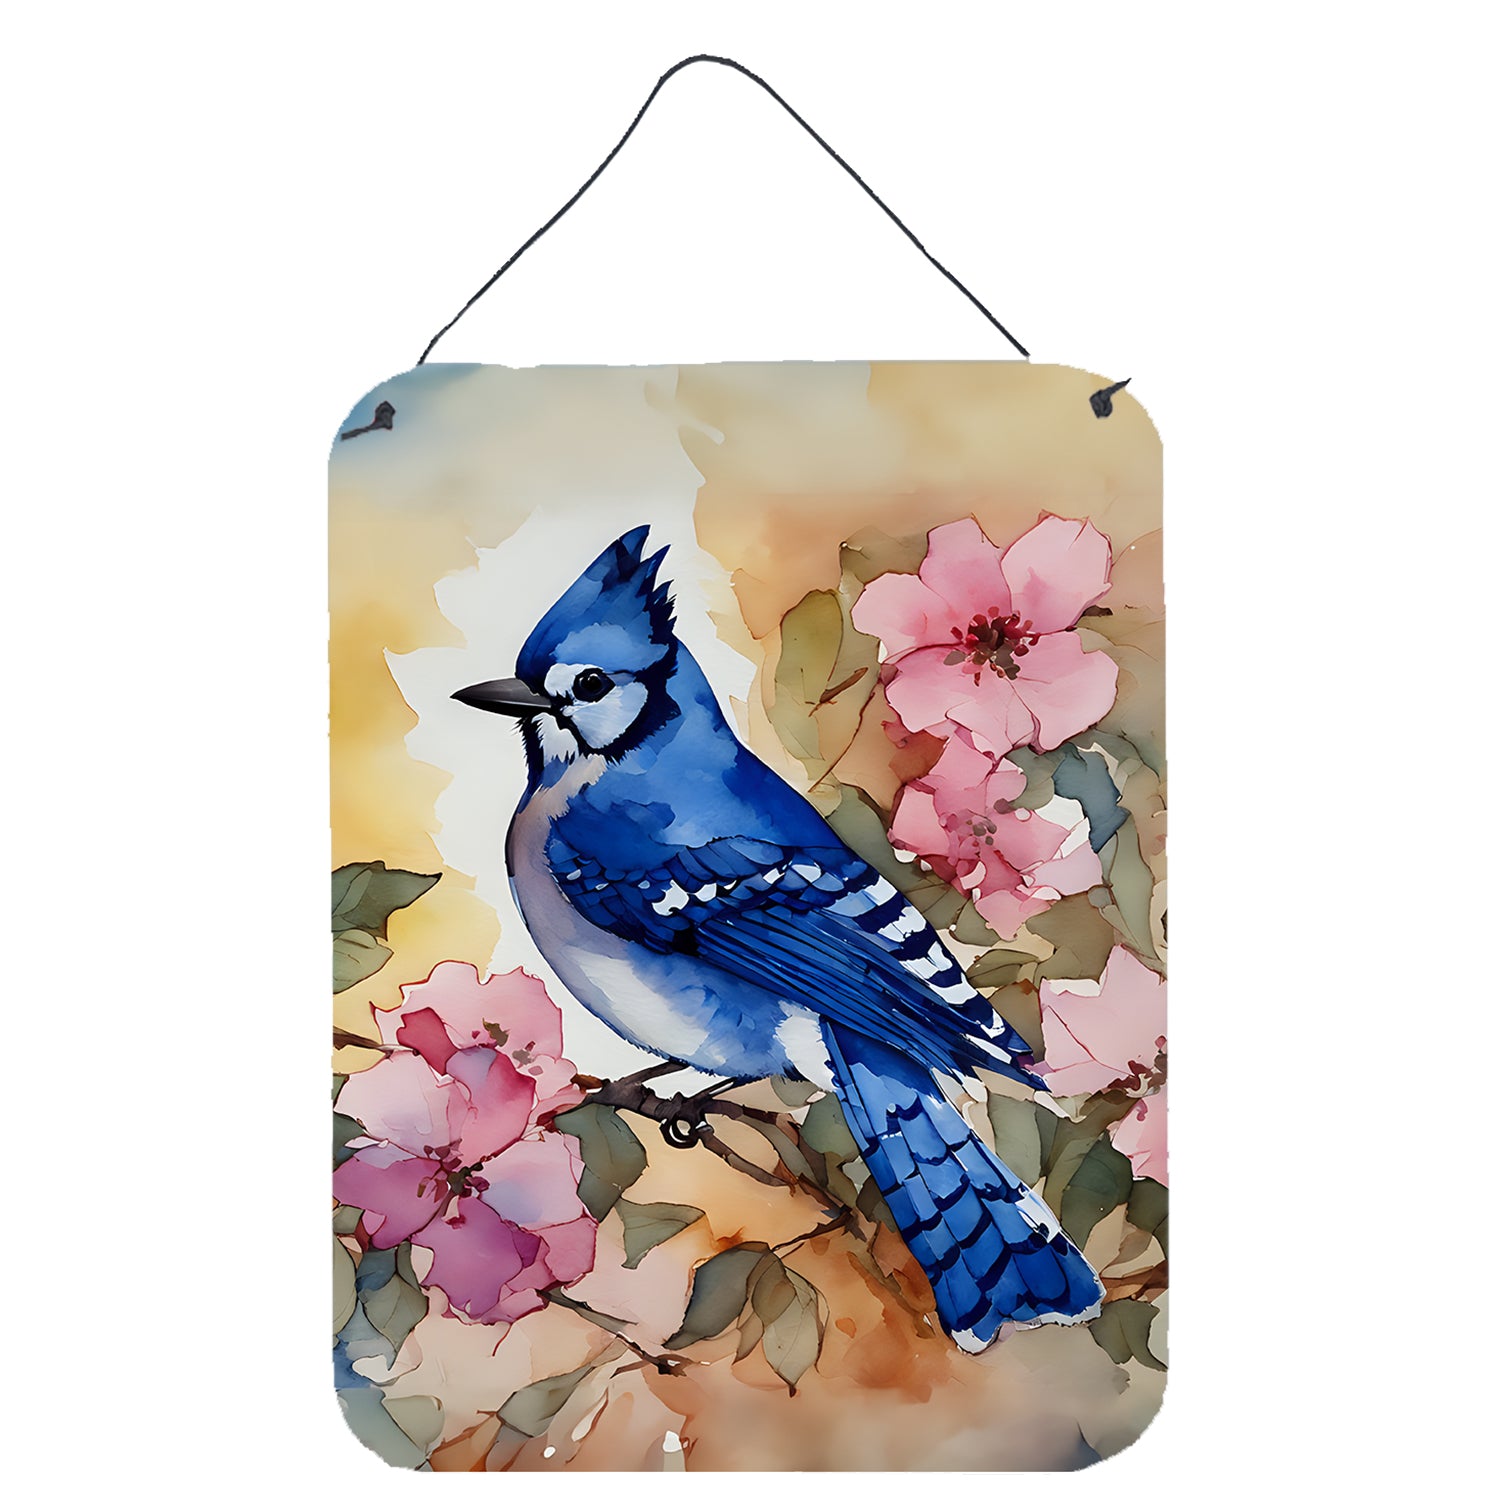 Buy this Blue Jay Wall or Door Hanging Prints